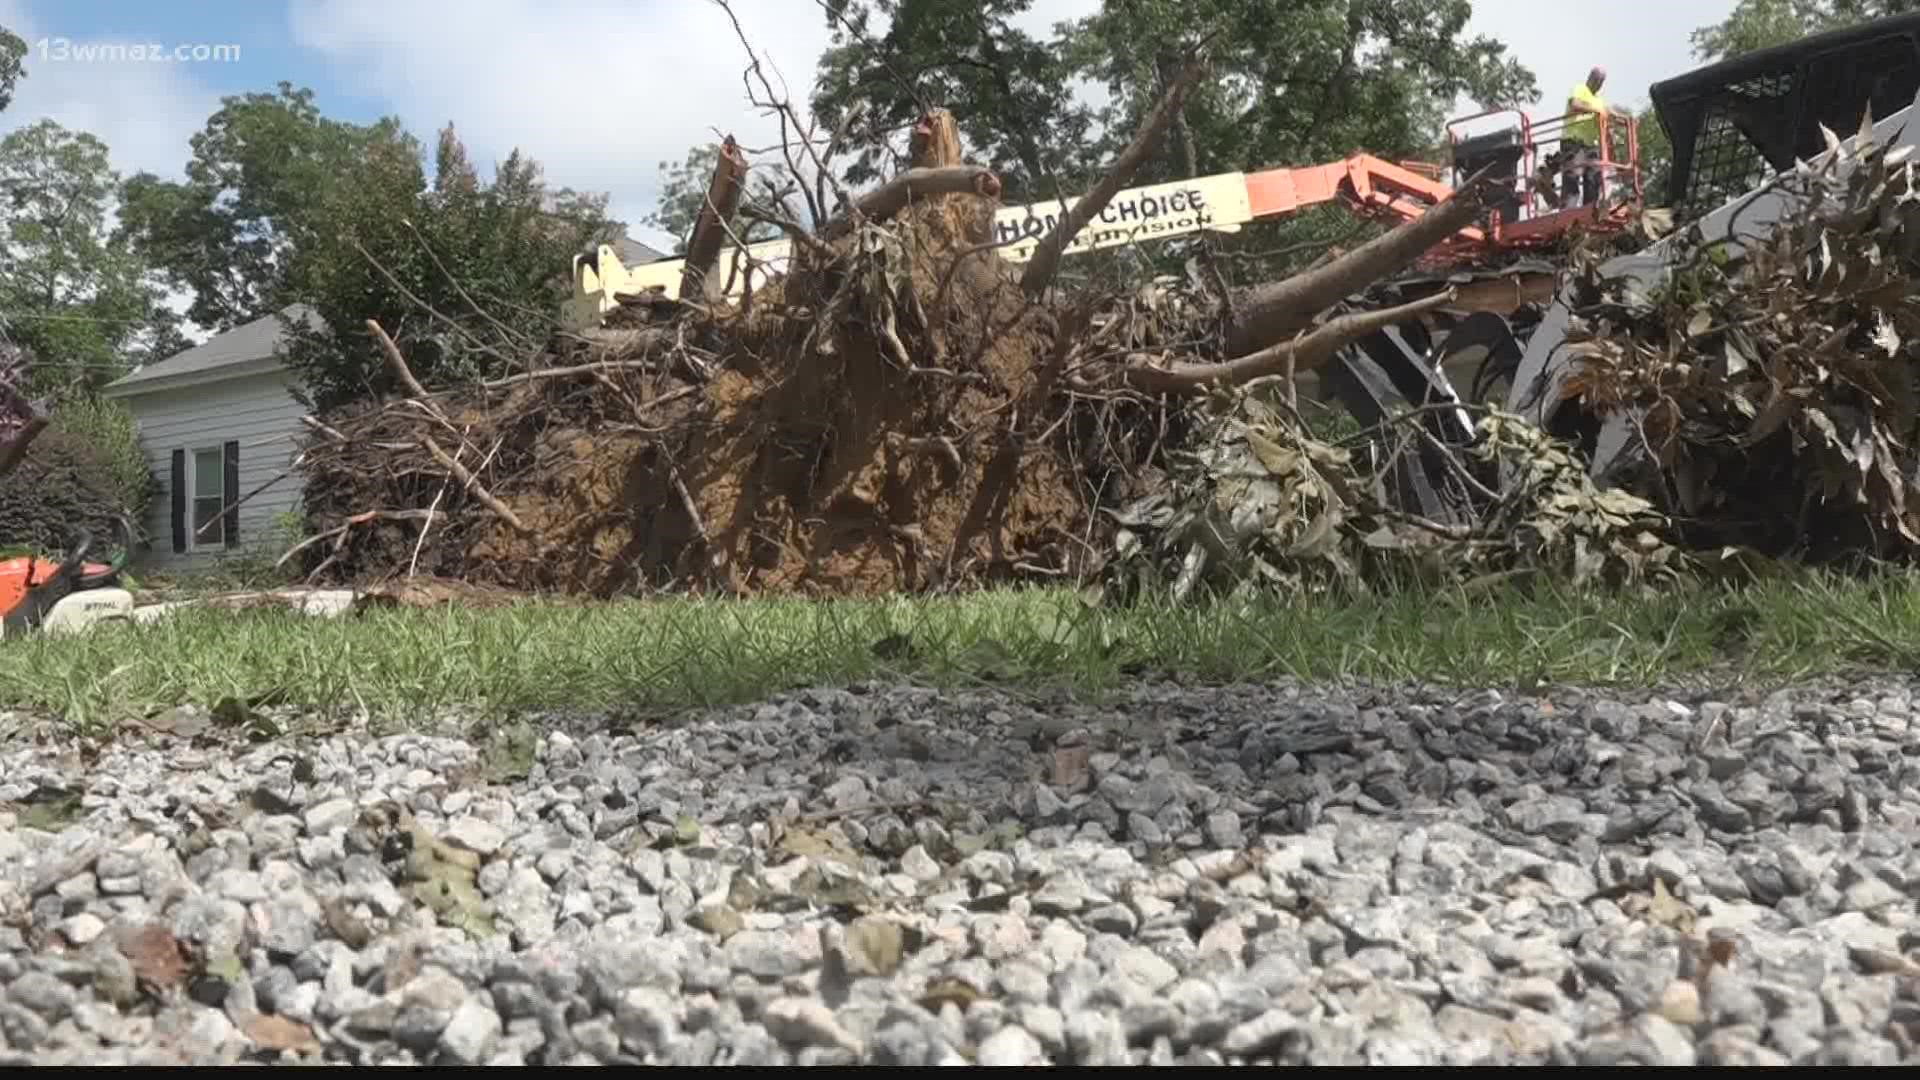 Storms from last Friday night left thousands of dollars in damage at a south Bibb County farm.